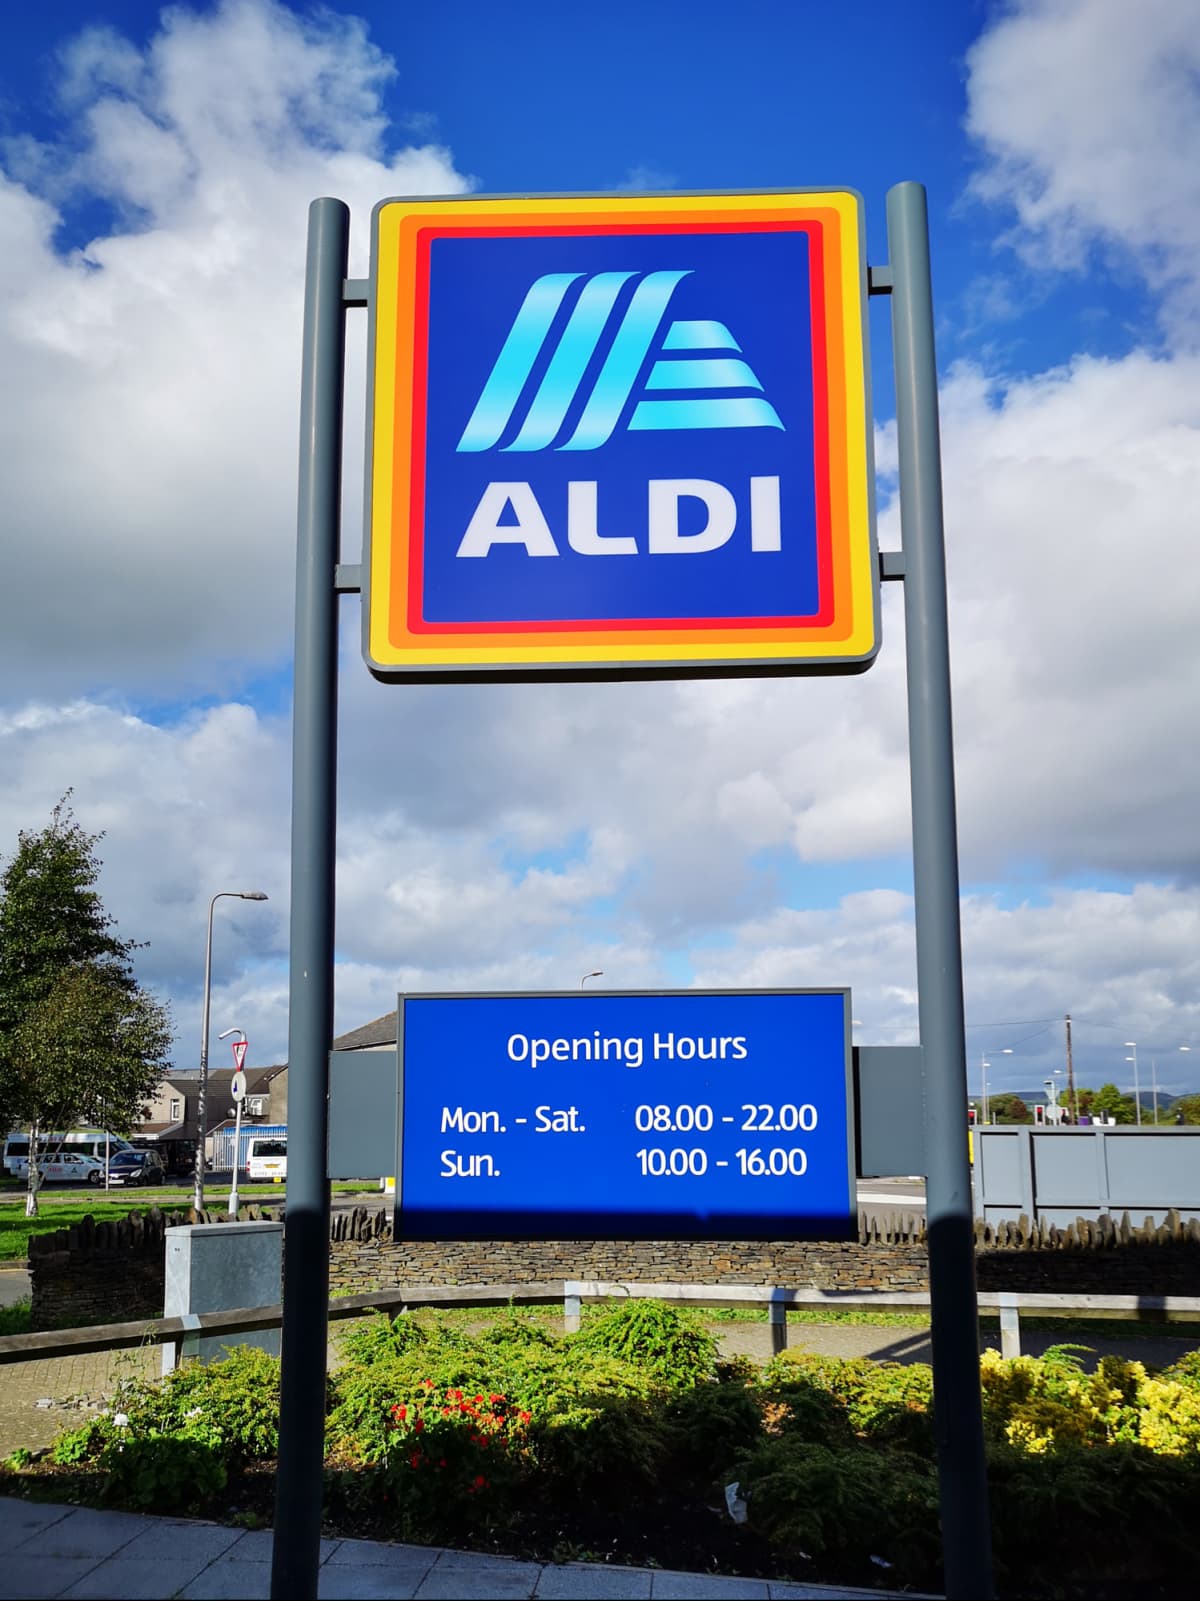 Aldi shop sign with opening hours against blue sky, Martlesham Heath, Suffolk, England, UK. (Photo by: Geography Photos/UCG/Universal Images Group via Getty Images)